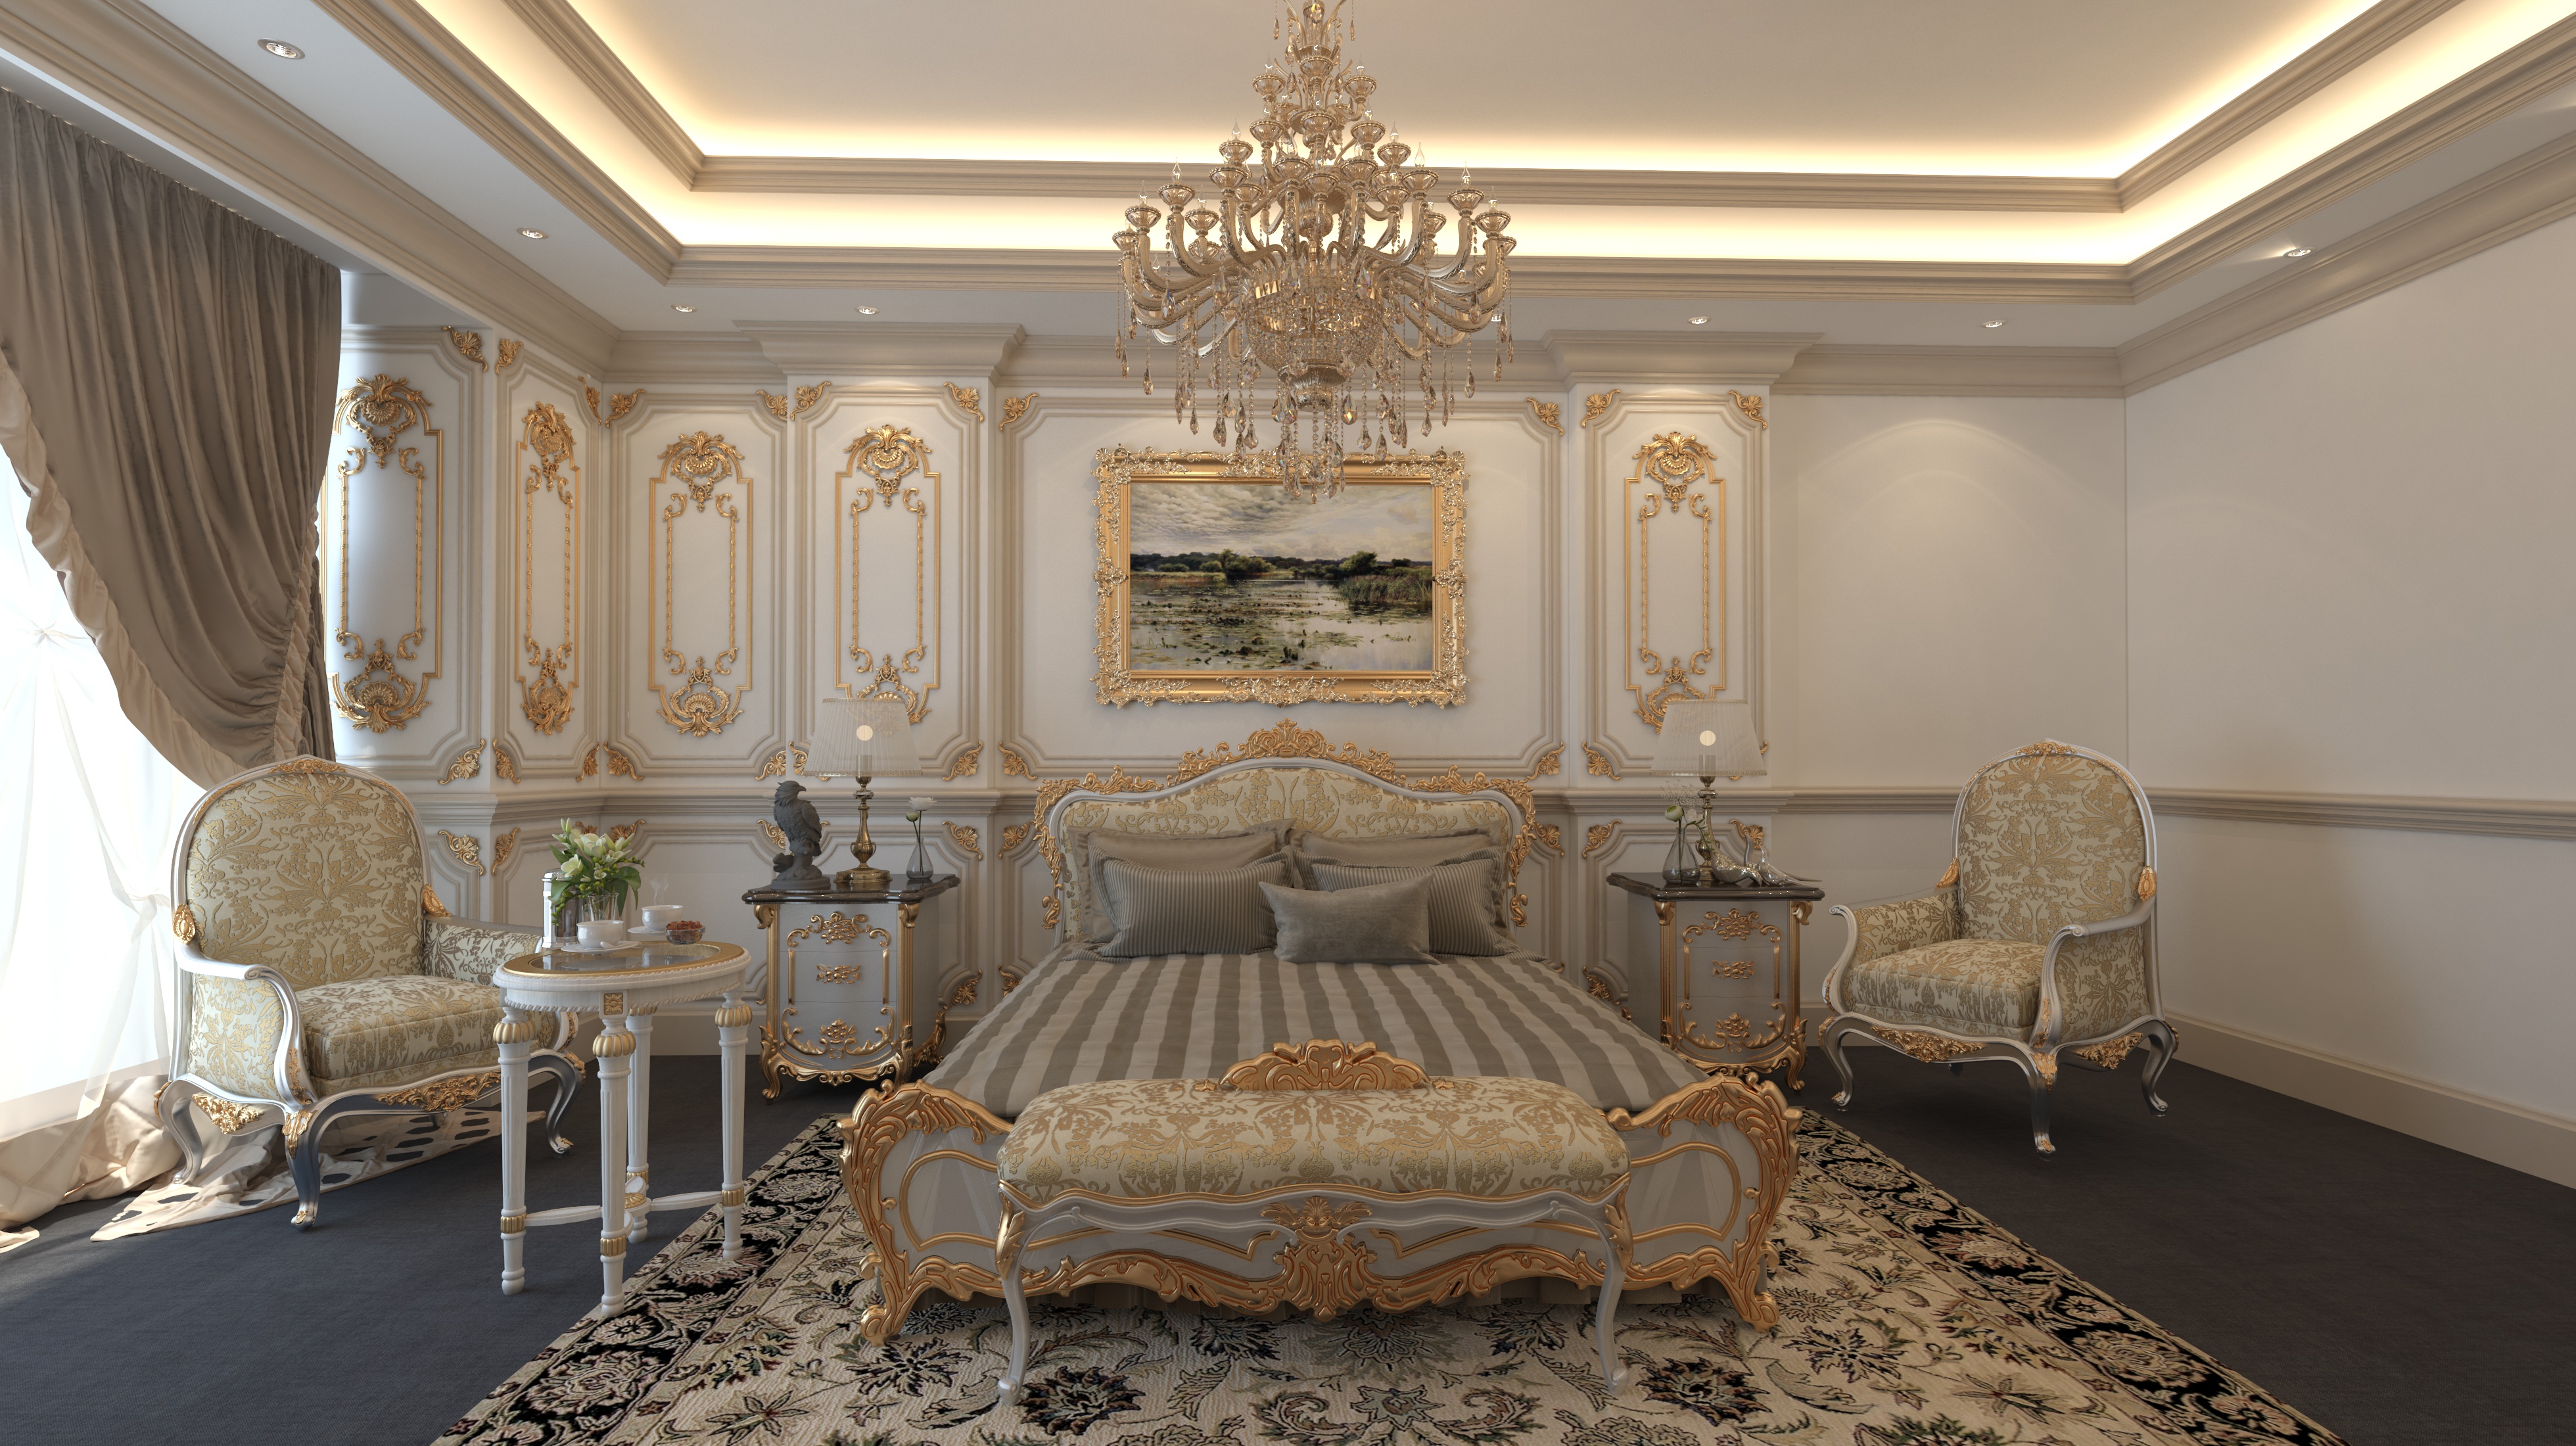 man made, room, armchair, bed, bedroom, carpet, chandelier, interior, painting, style